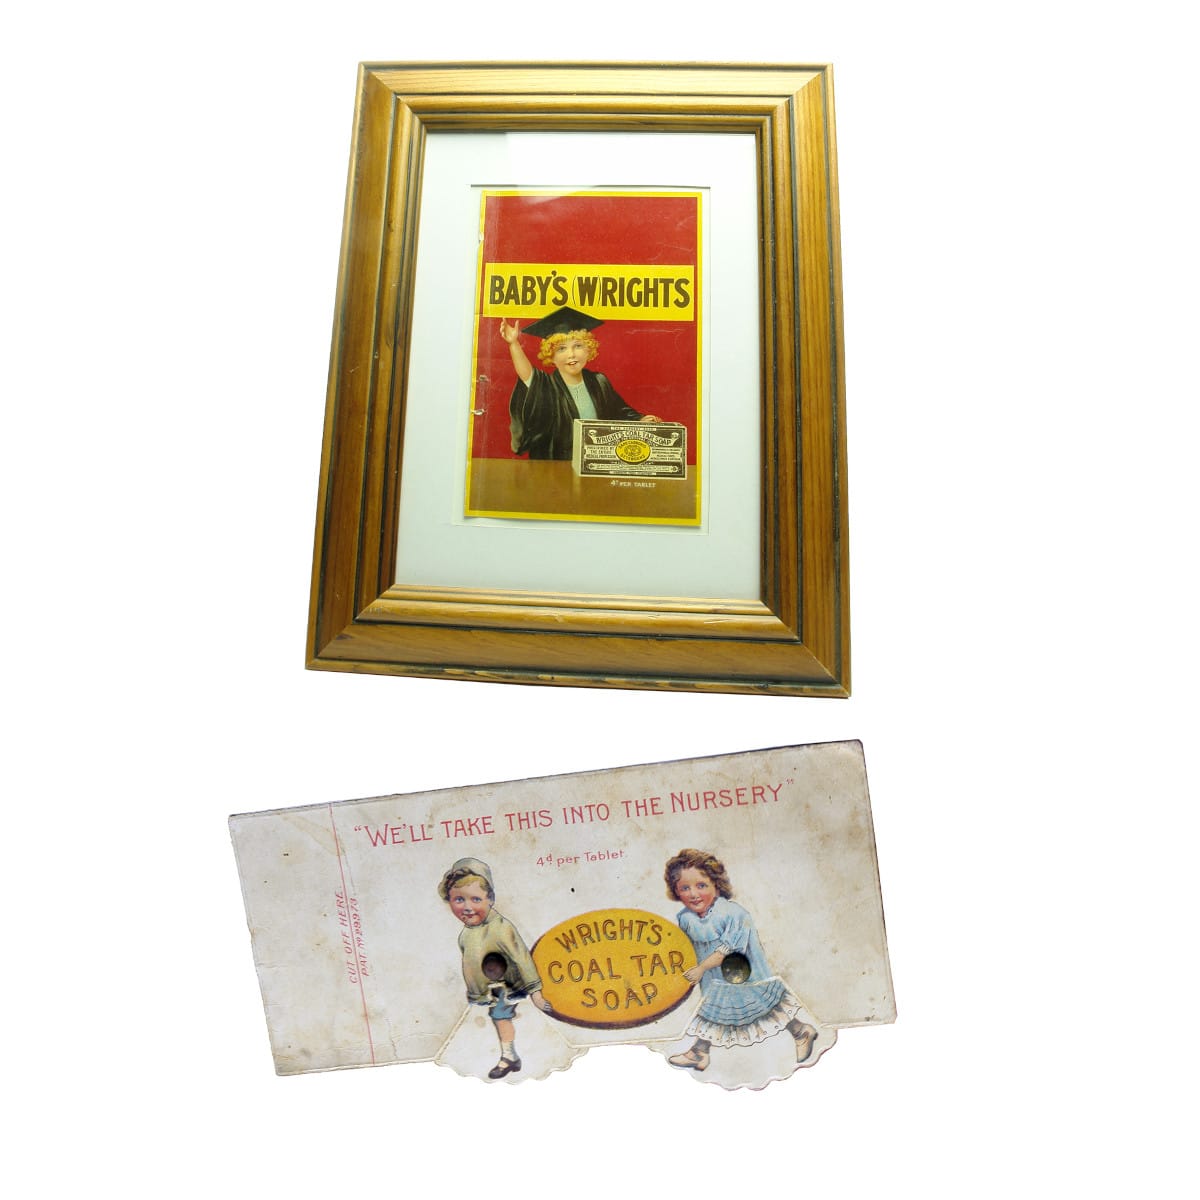 Pair of Wrights Coal Tar Soap advertising items. Advertisement from My Magazine, Arthur Mee and Small card with rotating pieces.